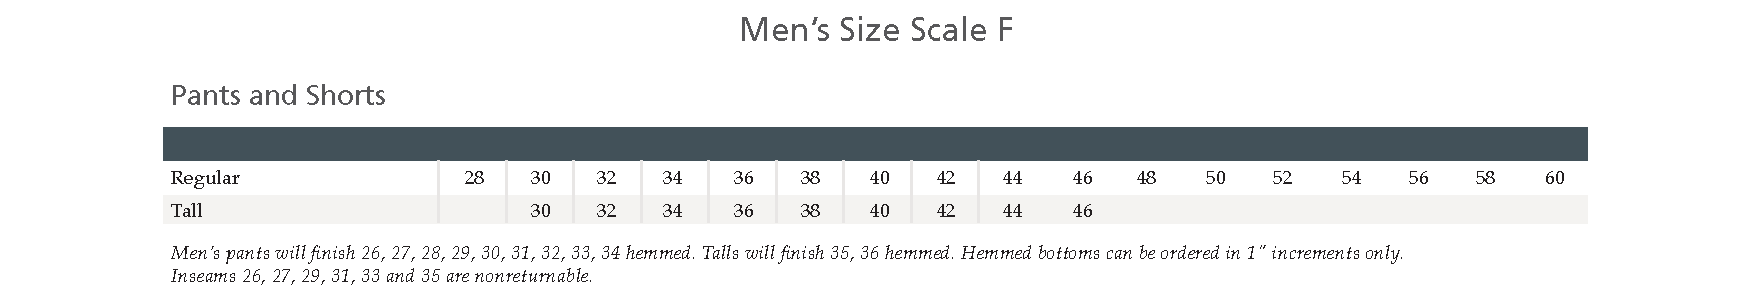 Size Scale F